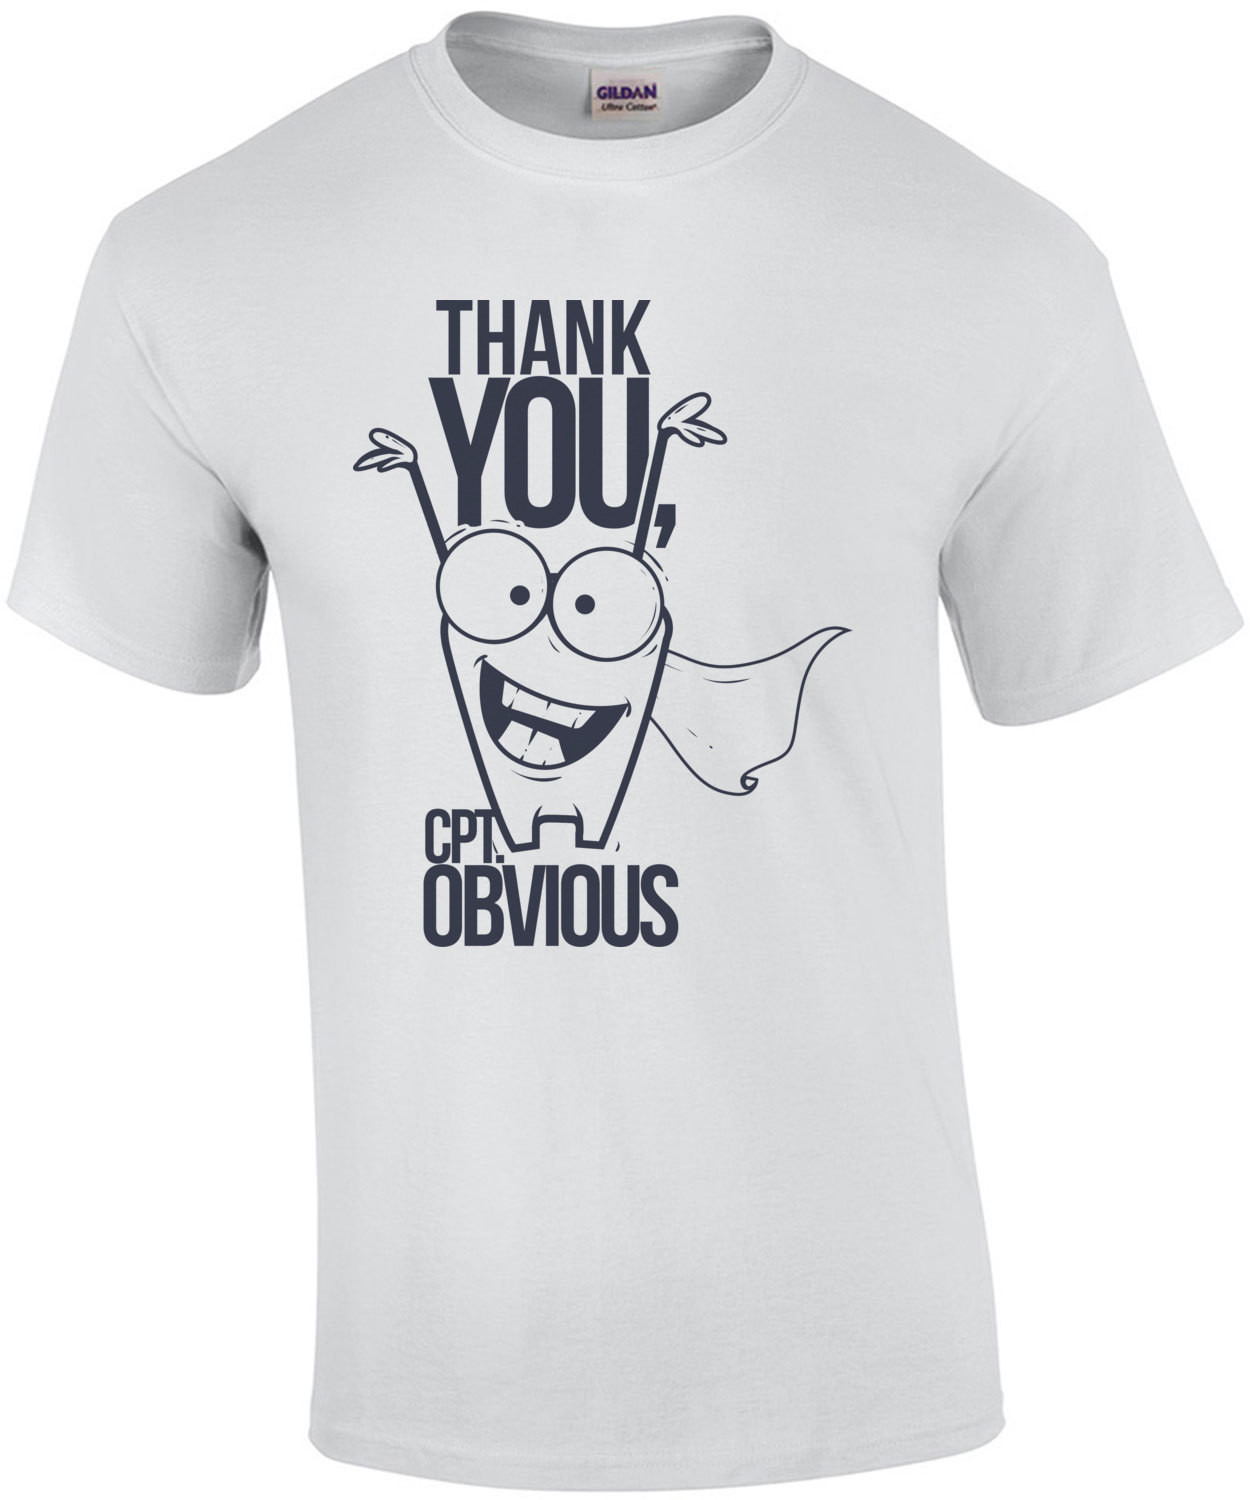 Thank You Captain Obvious T-Shirt